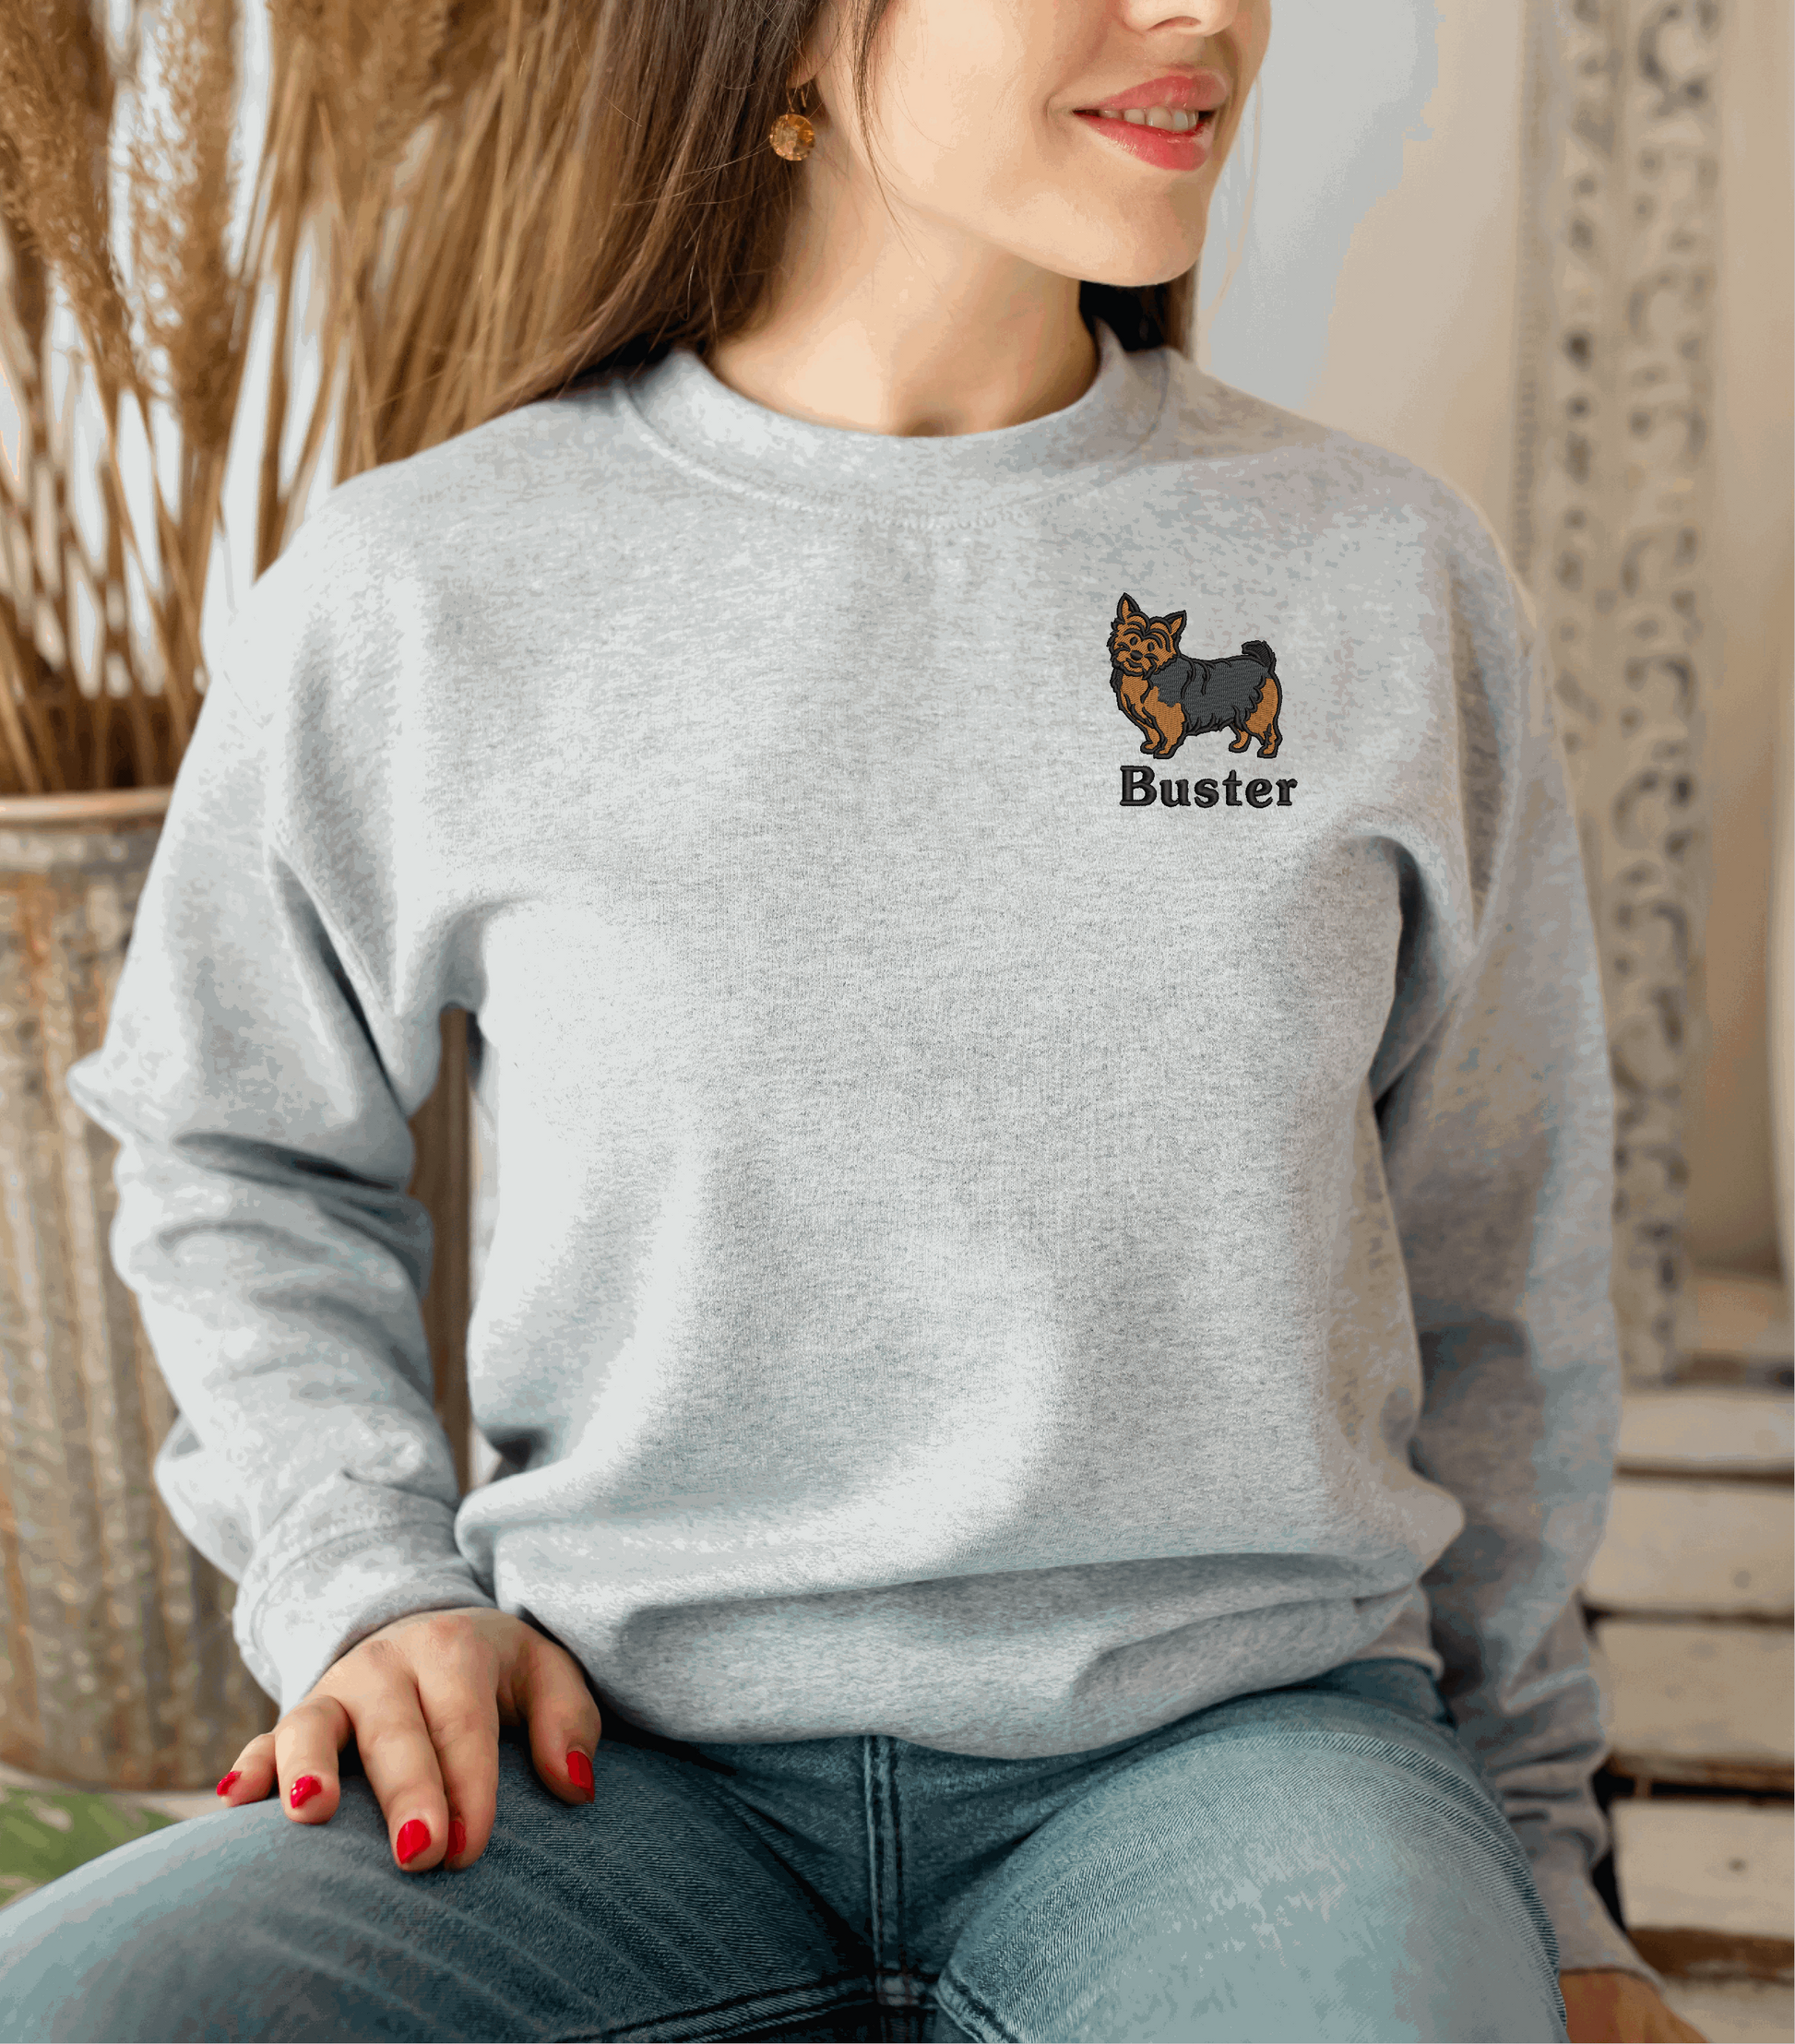 a woman sitting on a chair wearing a sweater with a dog on it